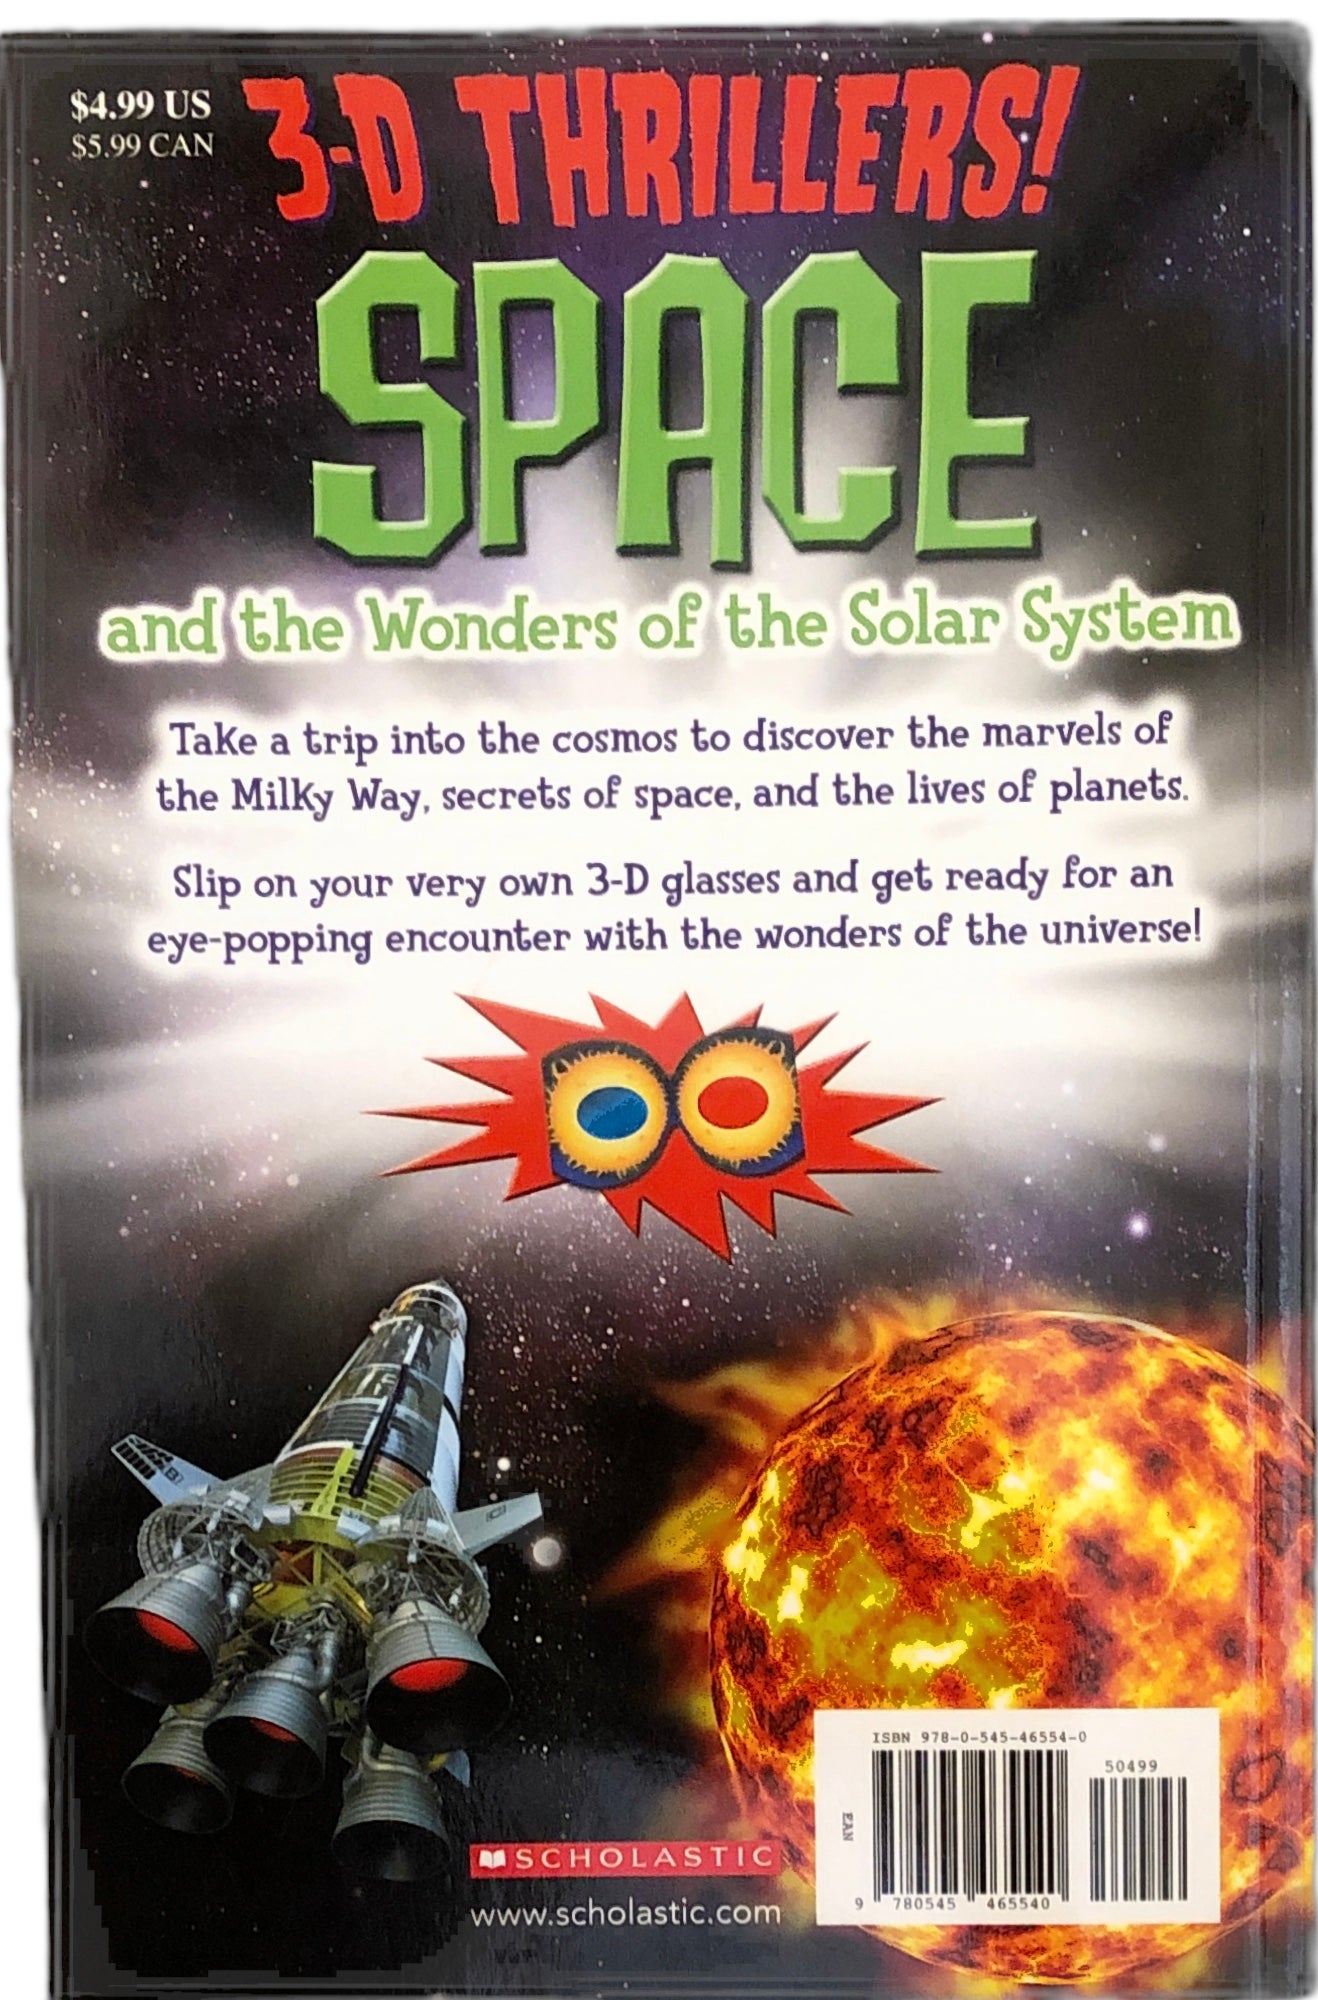 3-D Thrillers! Space and the Wonders of the Solar System by Paul Harrison